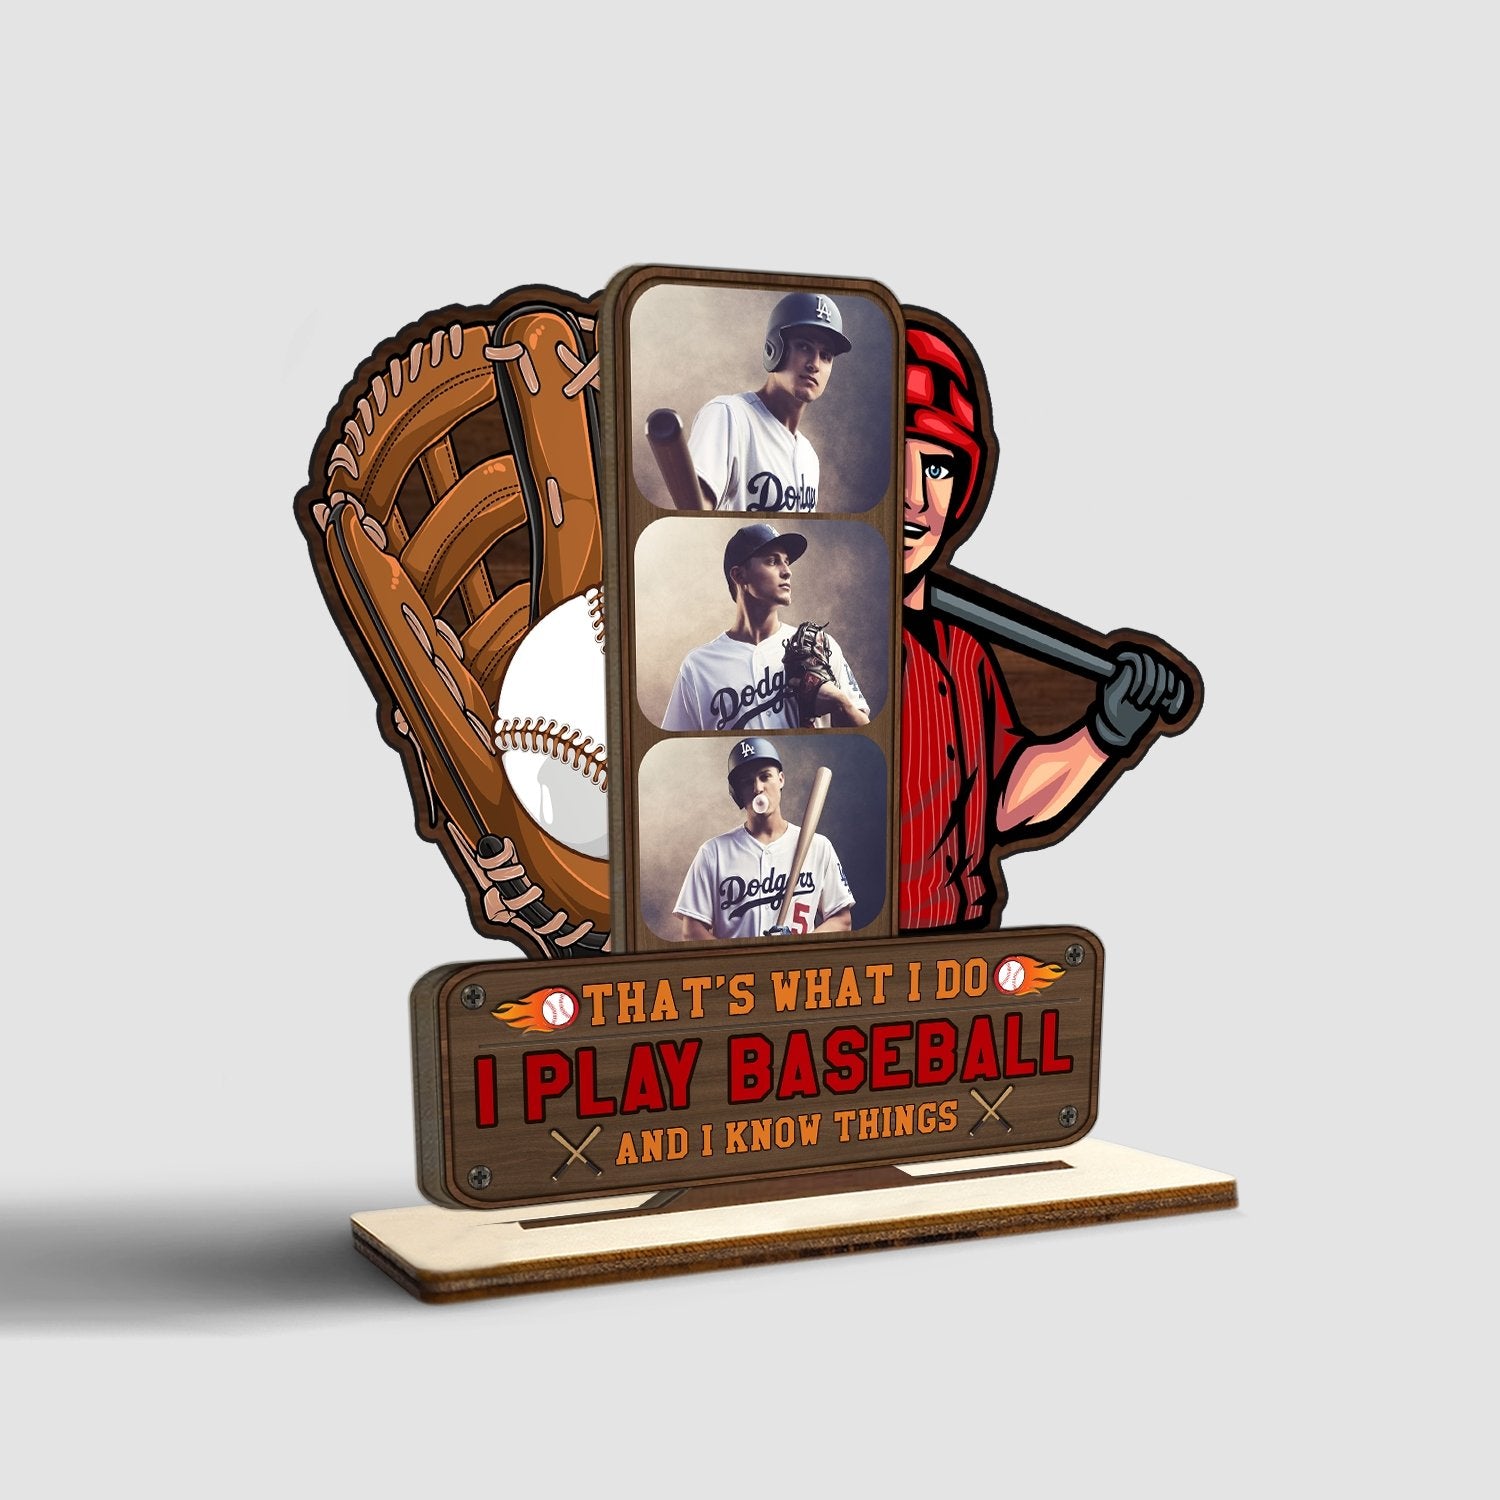 I Play Baseball And I Know Things, Custom Photo, Wooden Plaque 3 Layers